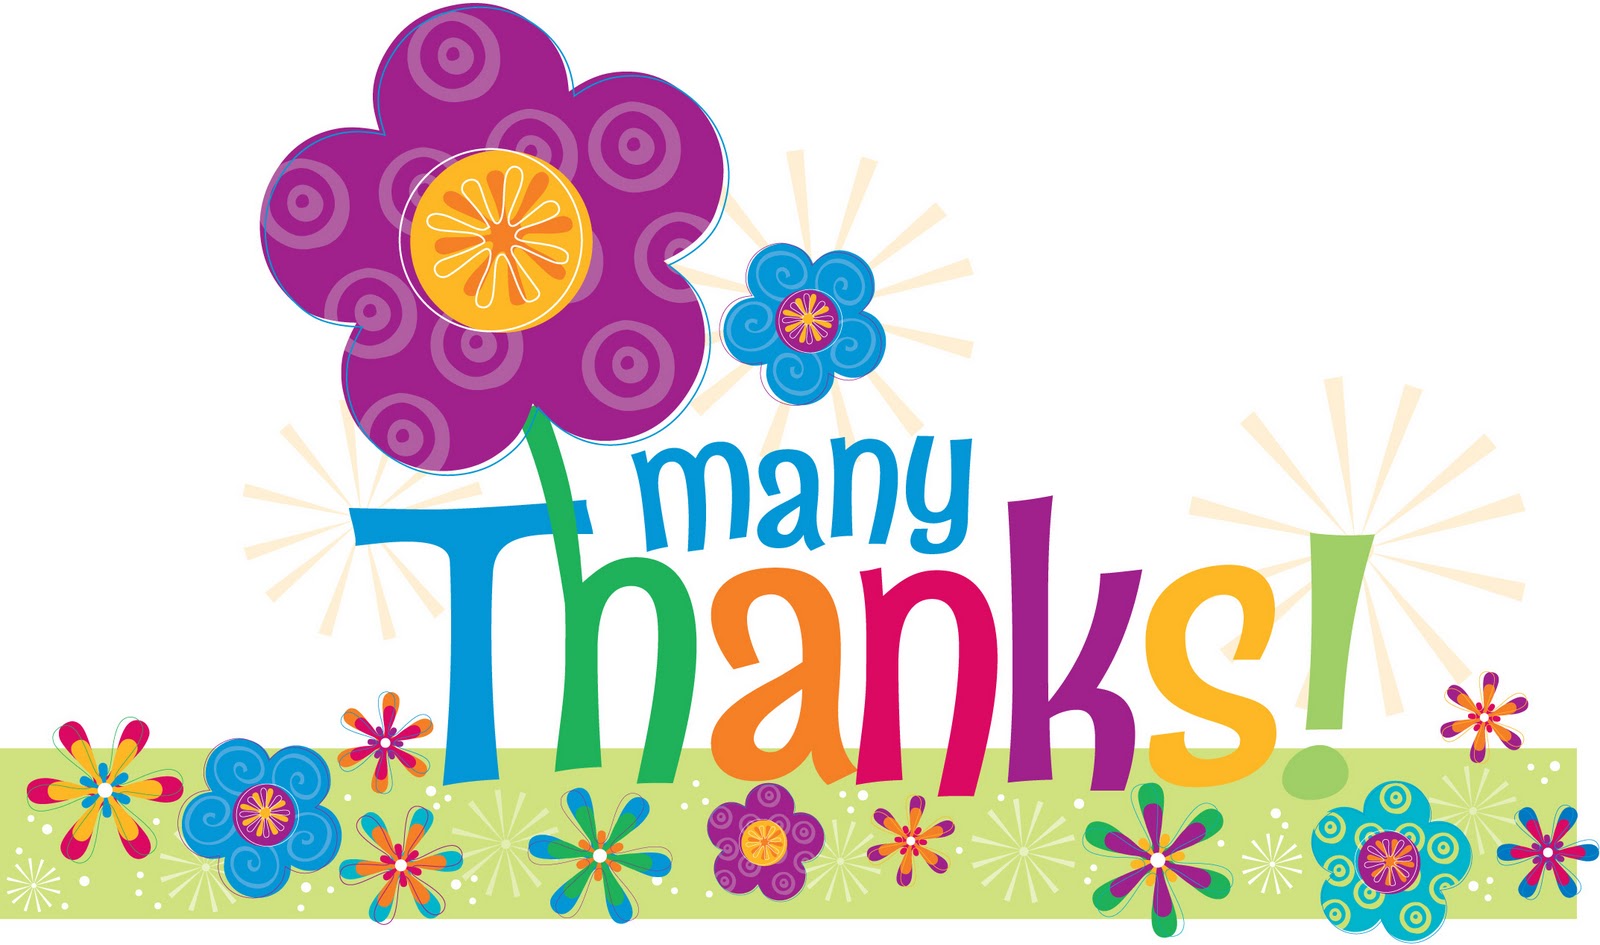 free online thank you clipart - photo #27